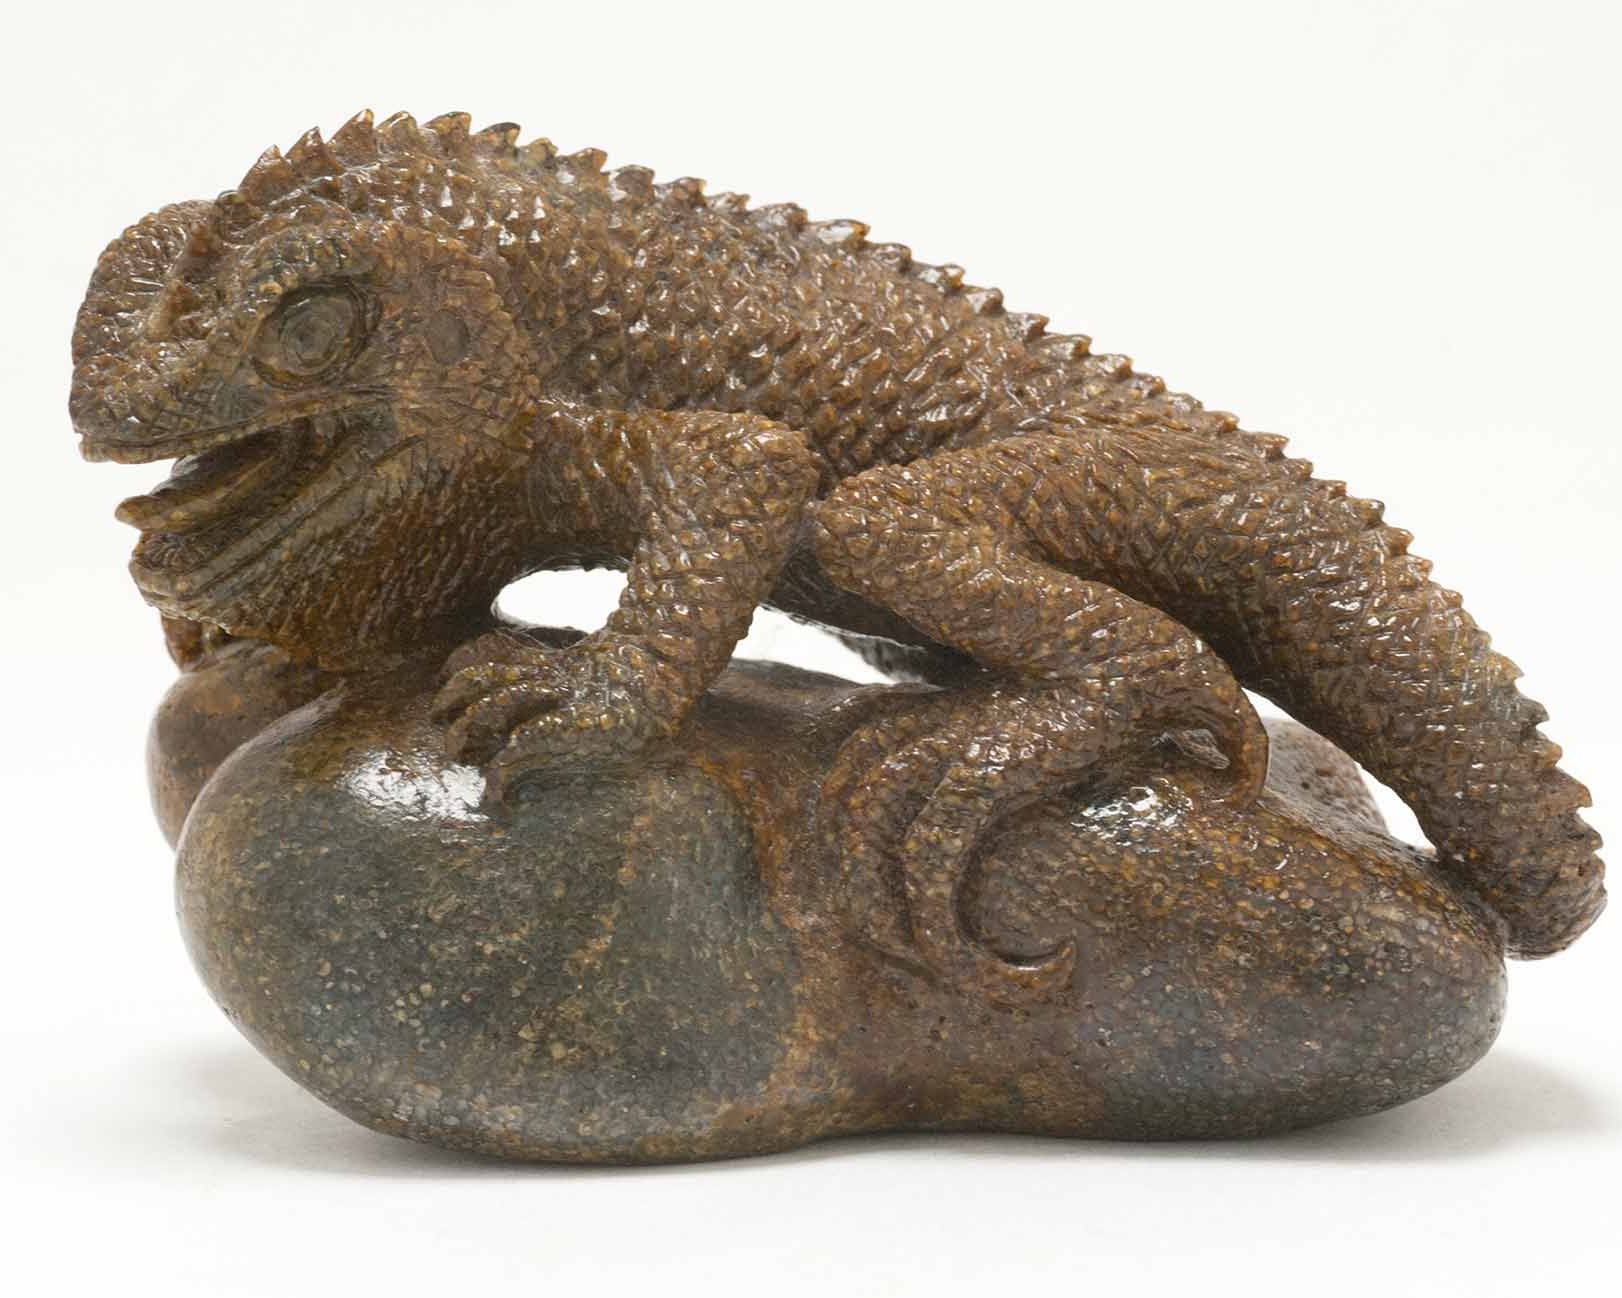 A perched lizard figure, carved out of fossilized whale bone by Ronald Stevens.